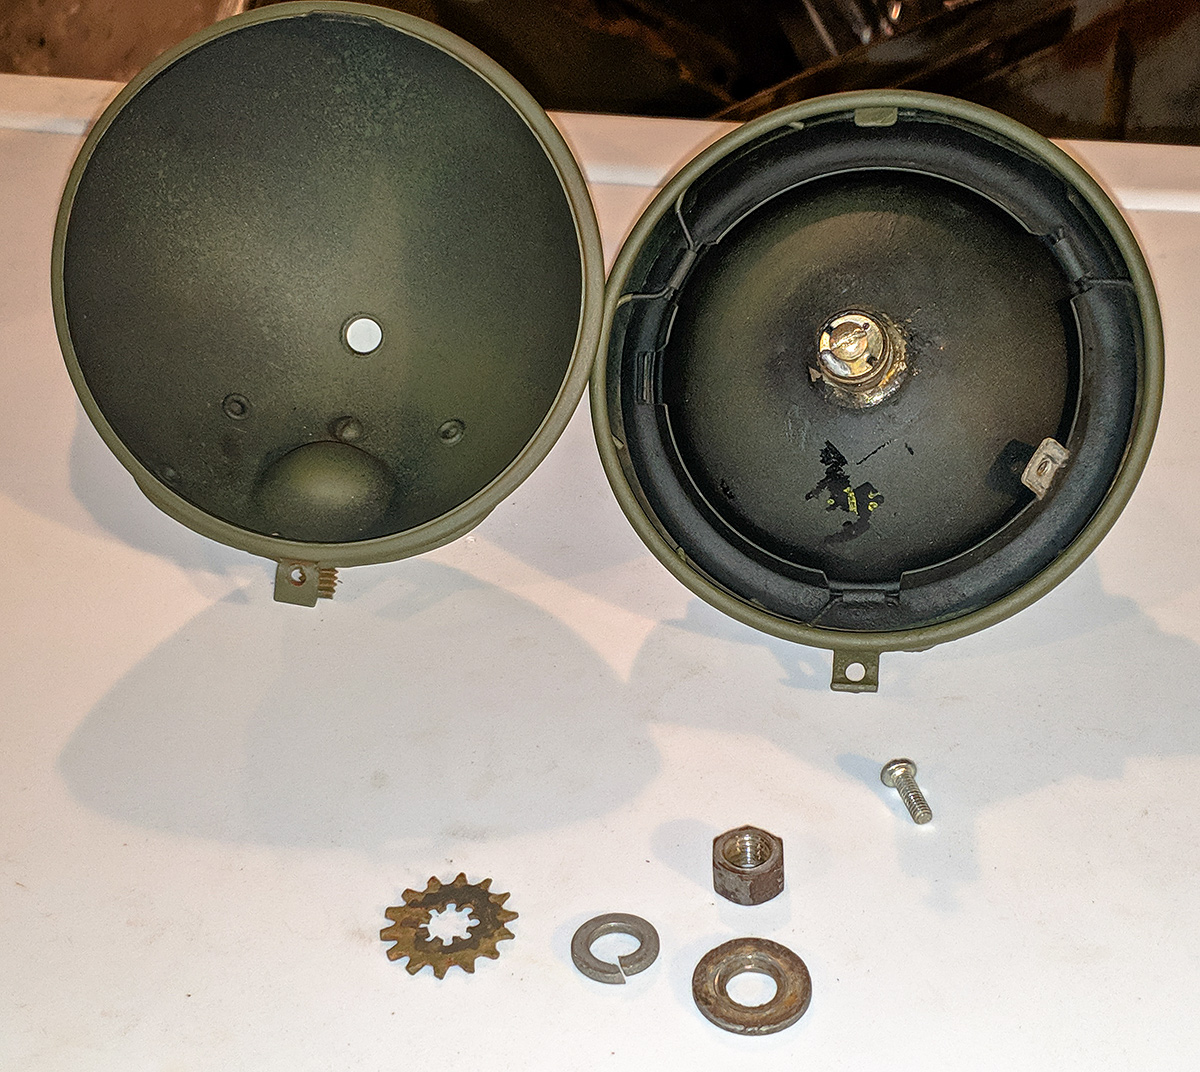 NOS MILITARY BLACKOUT LIGHT WITH MOUNT